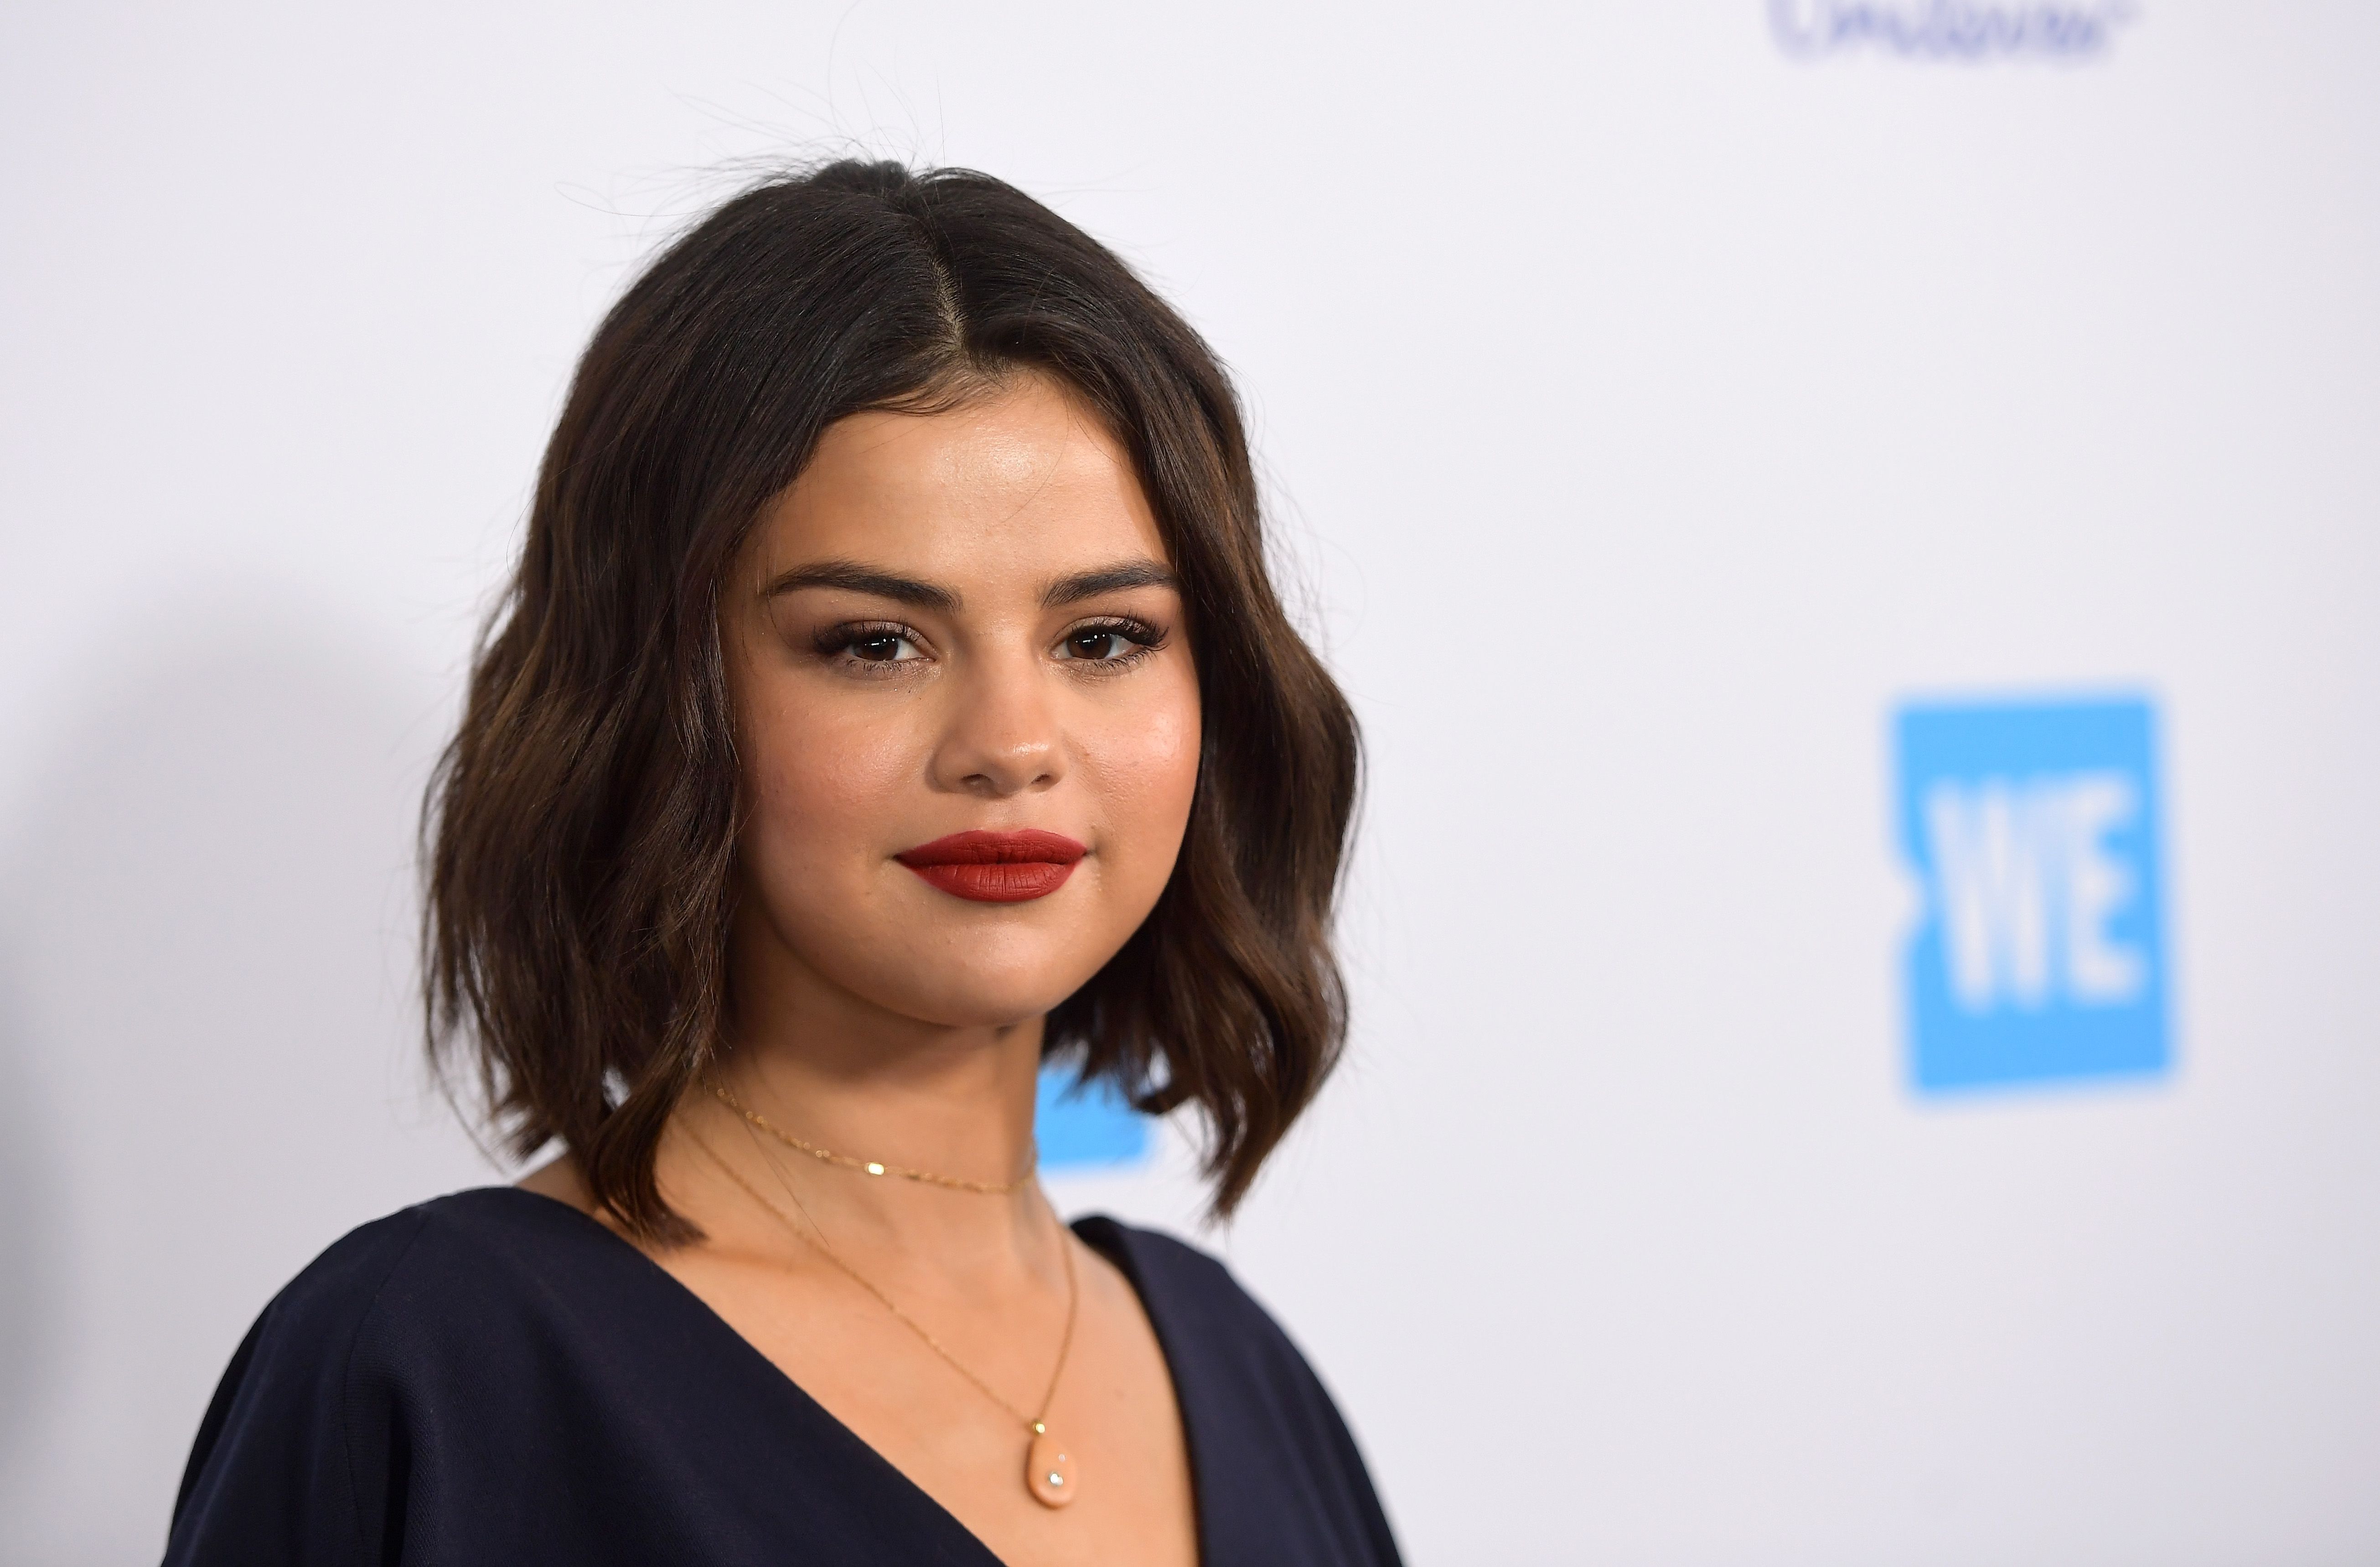 Selena Gomez Just Posted A Hilarious TikTok, But Her Followers Can't Stop  Talking About Her New Curly Bob: 'OMG Your Hair' - SHEfinds